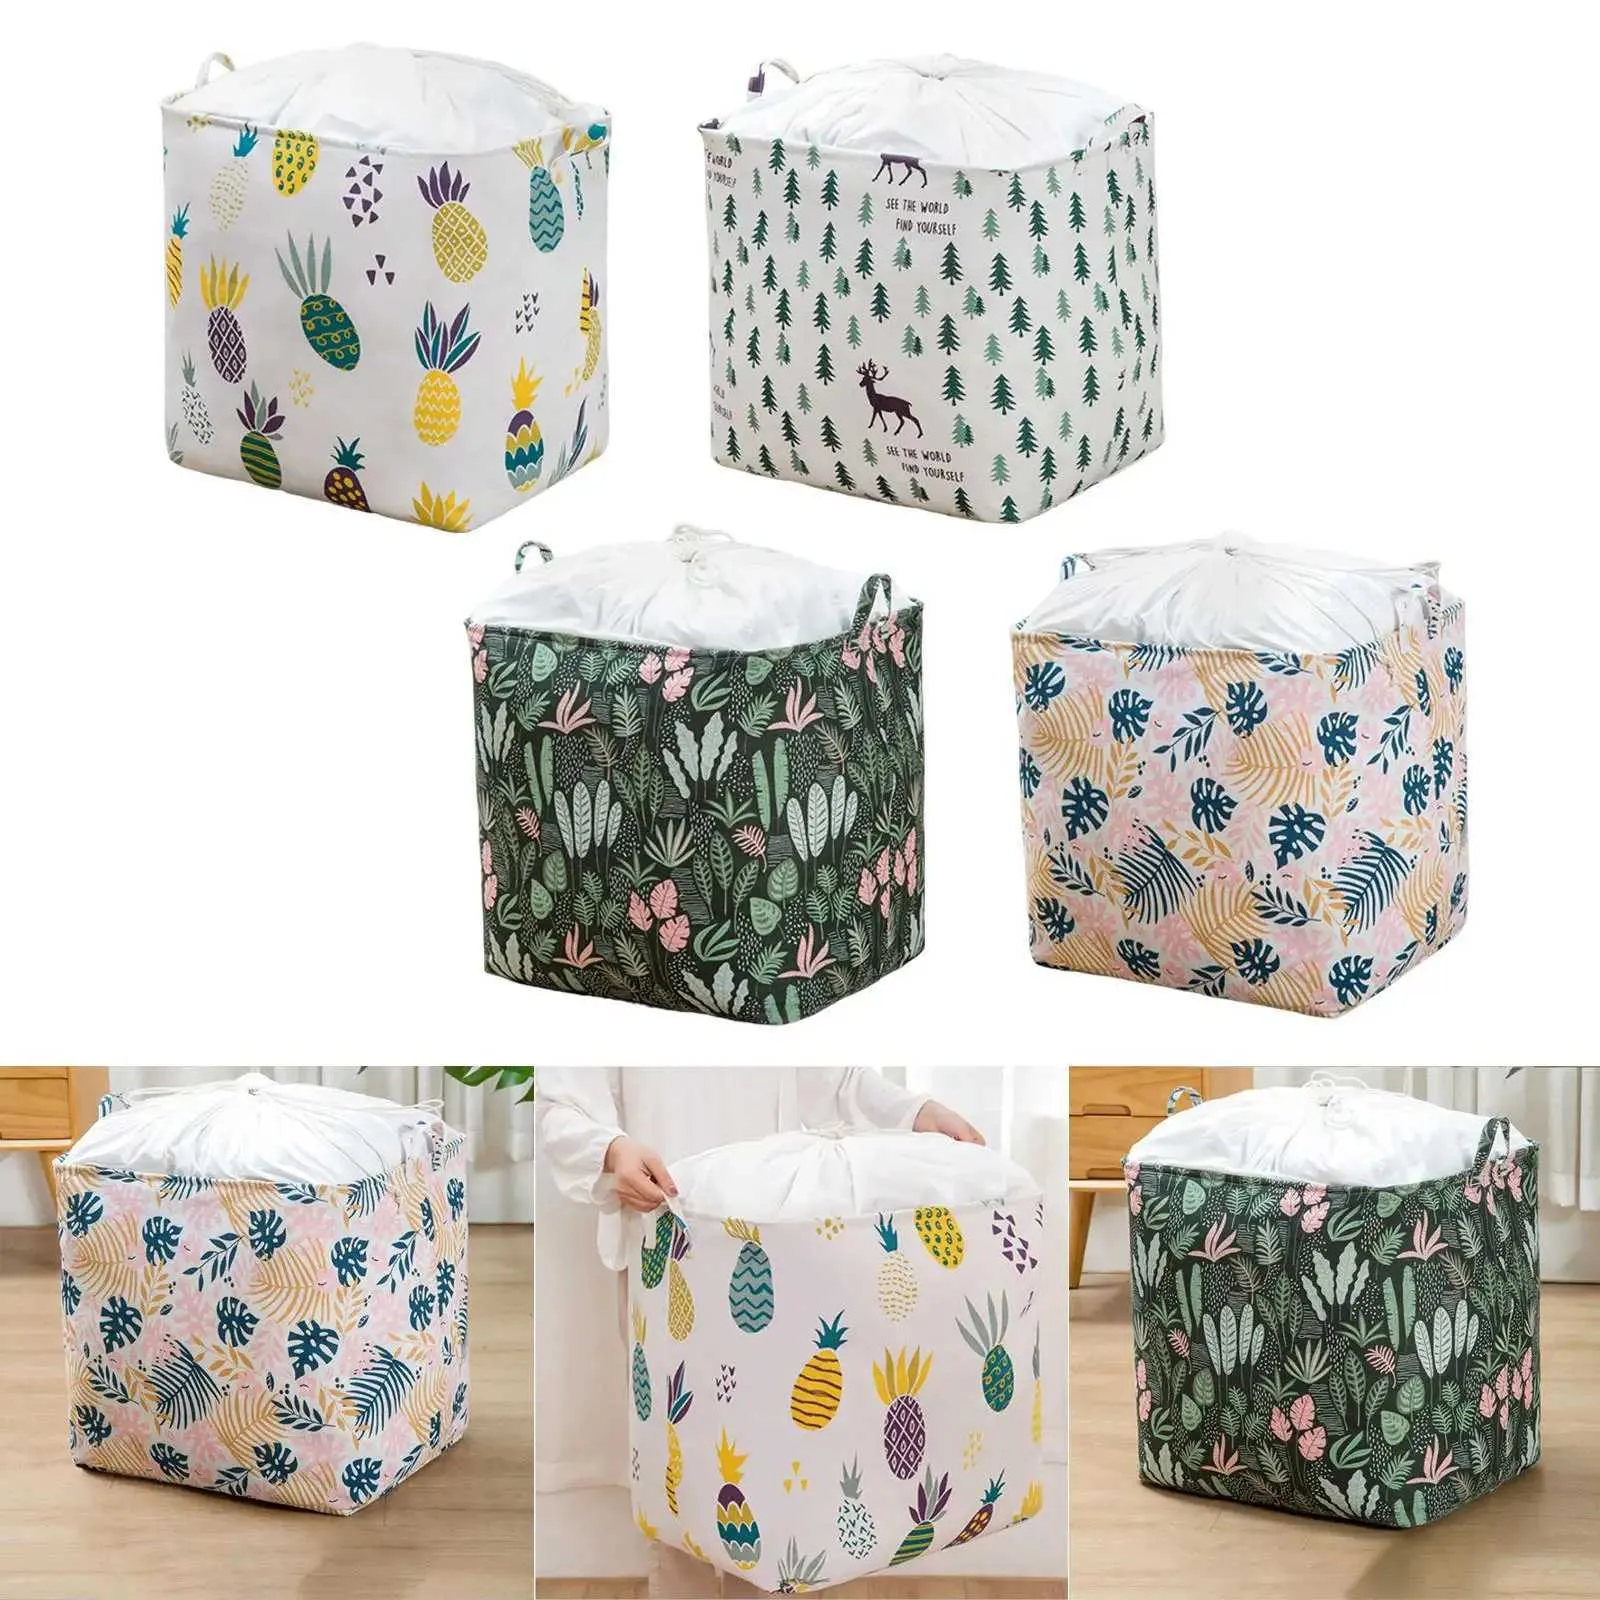 Household Laundry Basket 100L Large Capacity Toy Storage Bins Organizer for Kids Bedroom Clothes Toys Nursery Basket